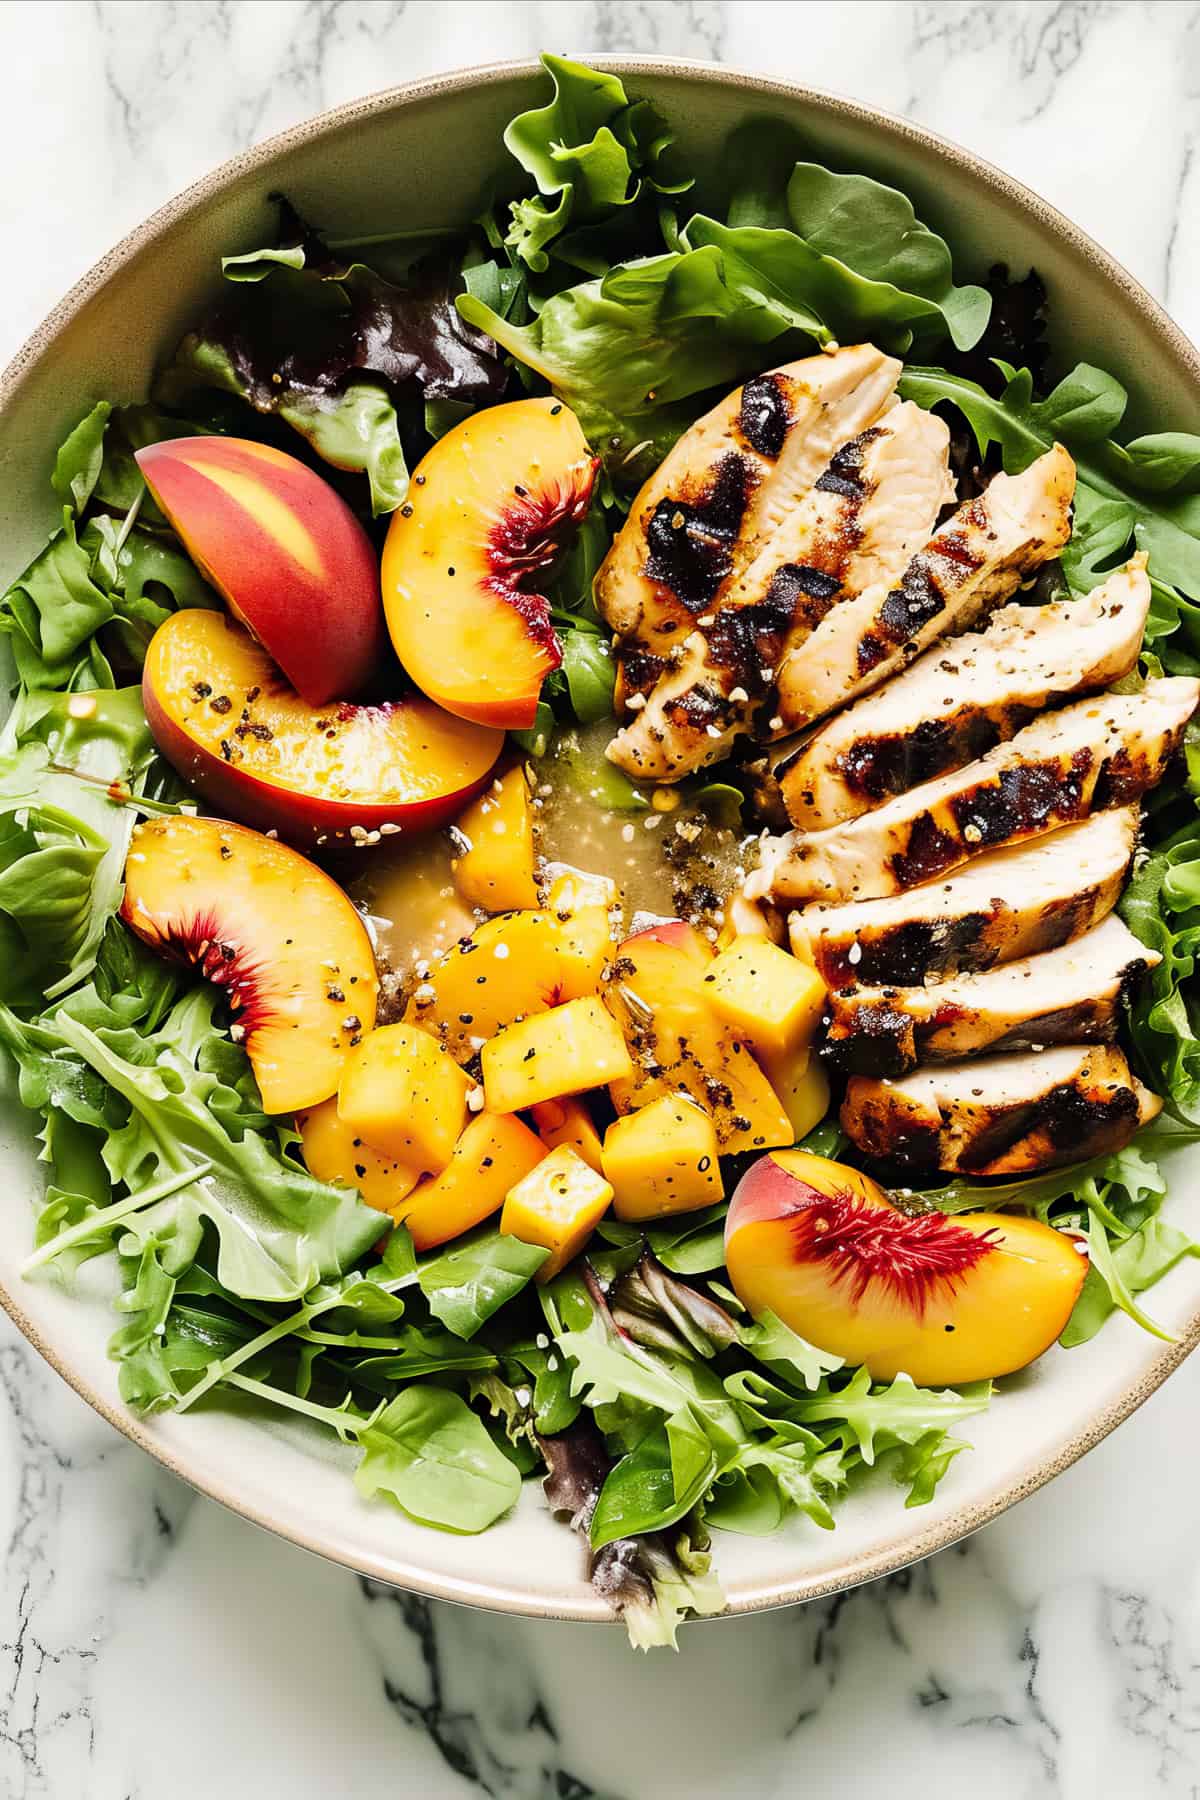 Maple chicken grilled with peaches and salad with vinaigrette dressing.